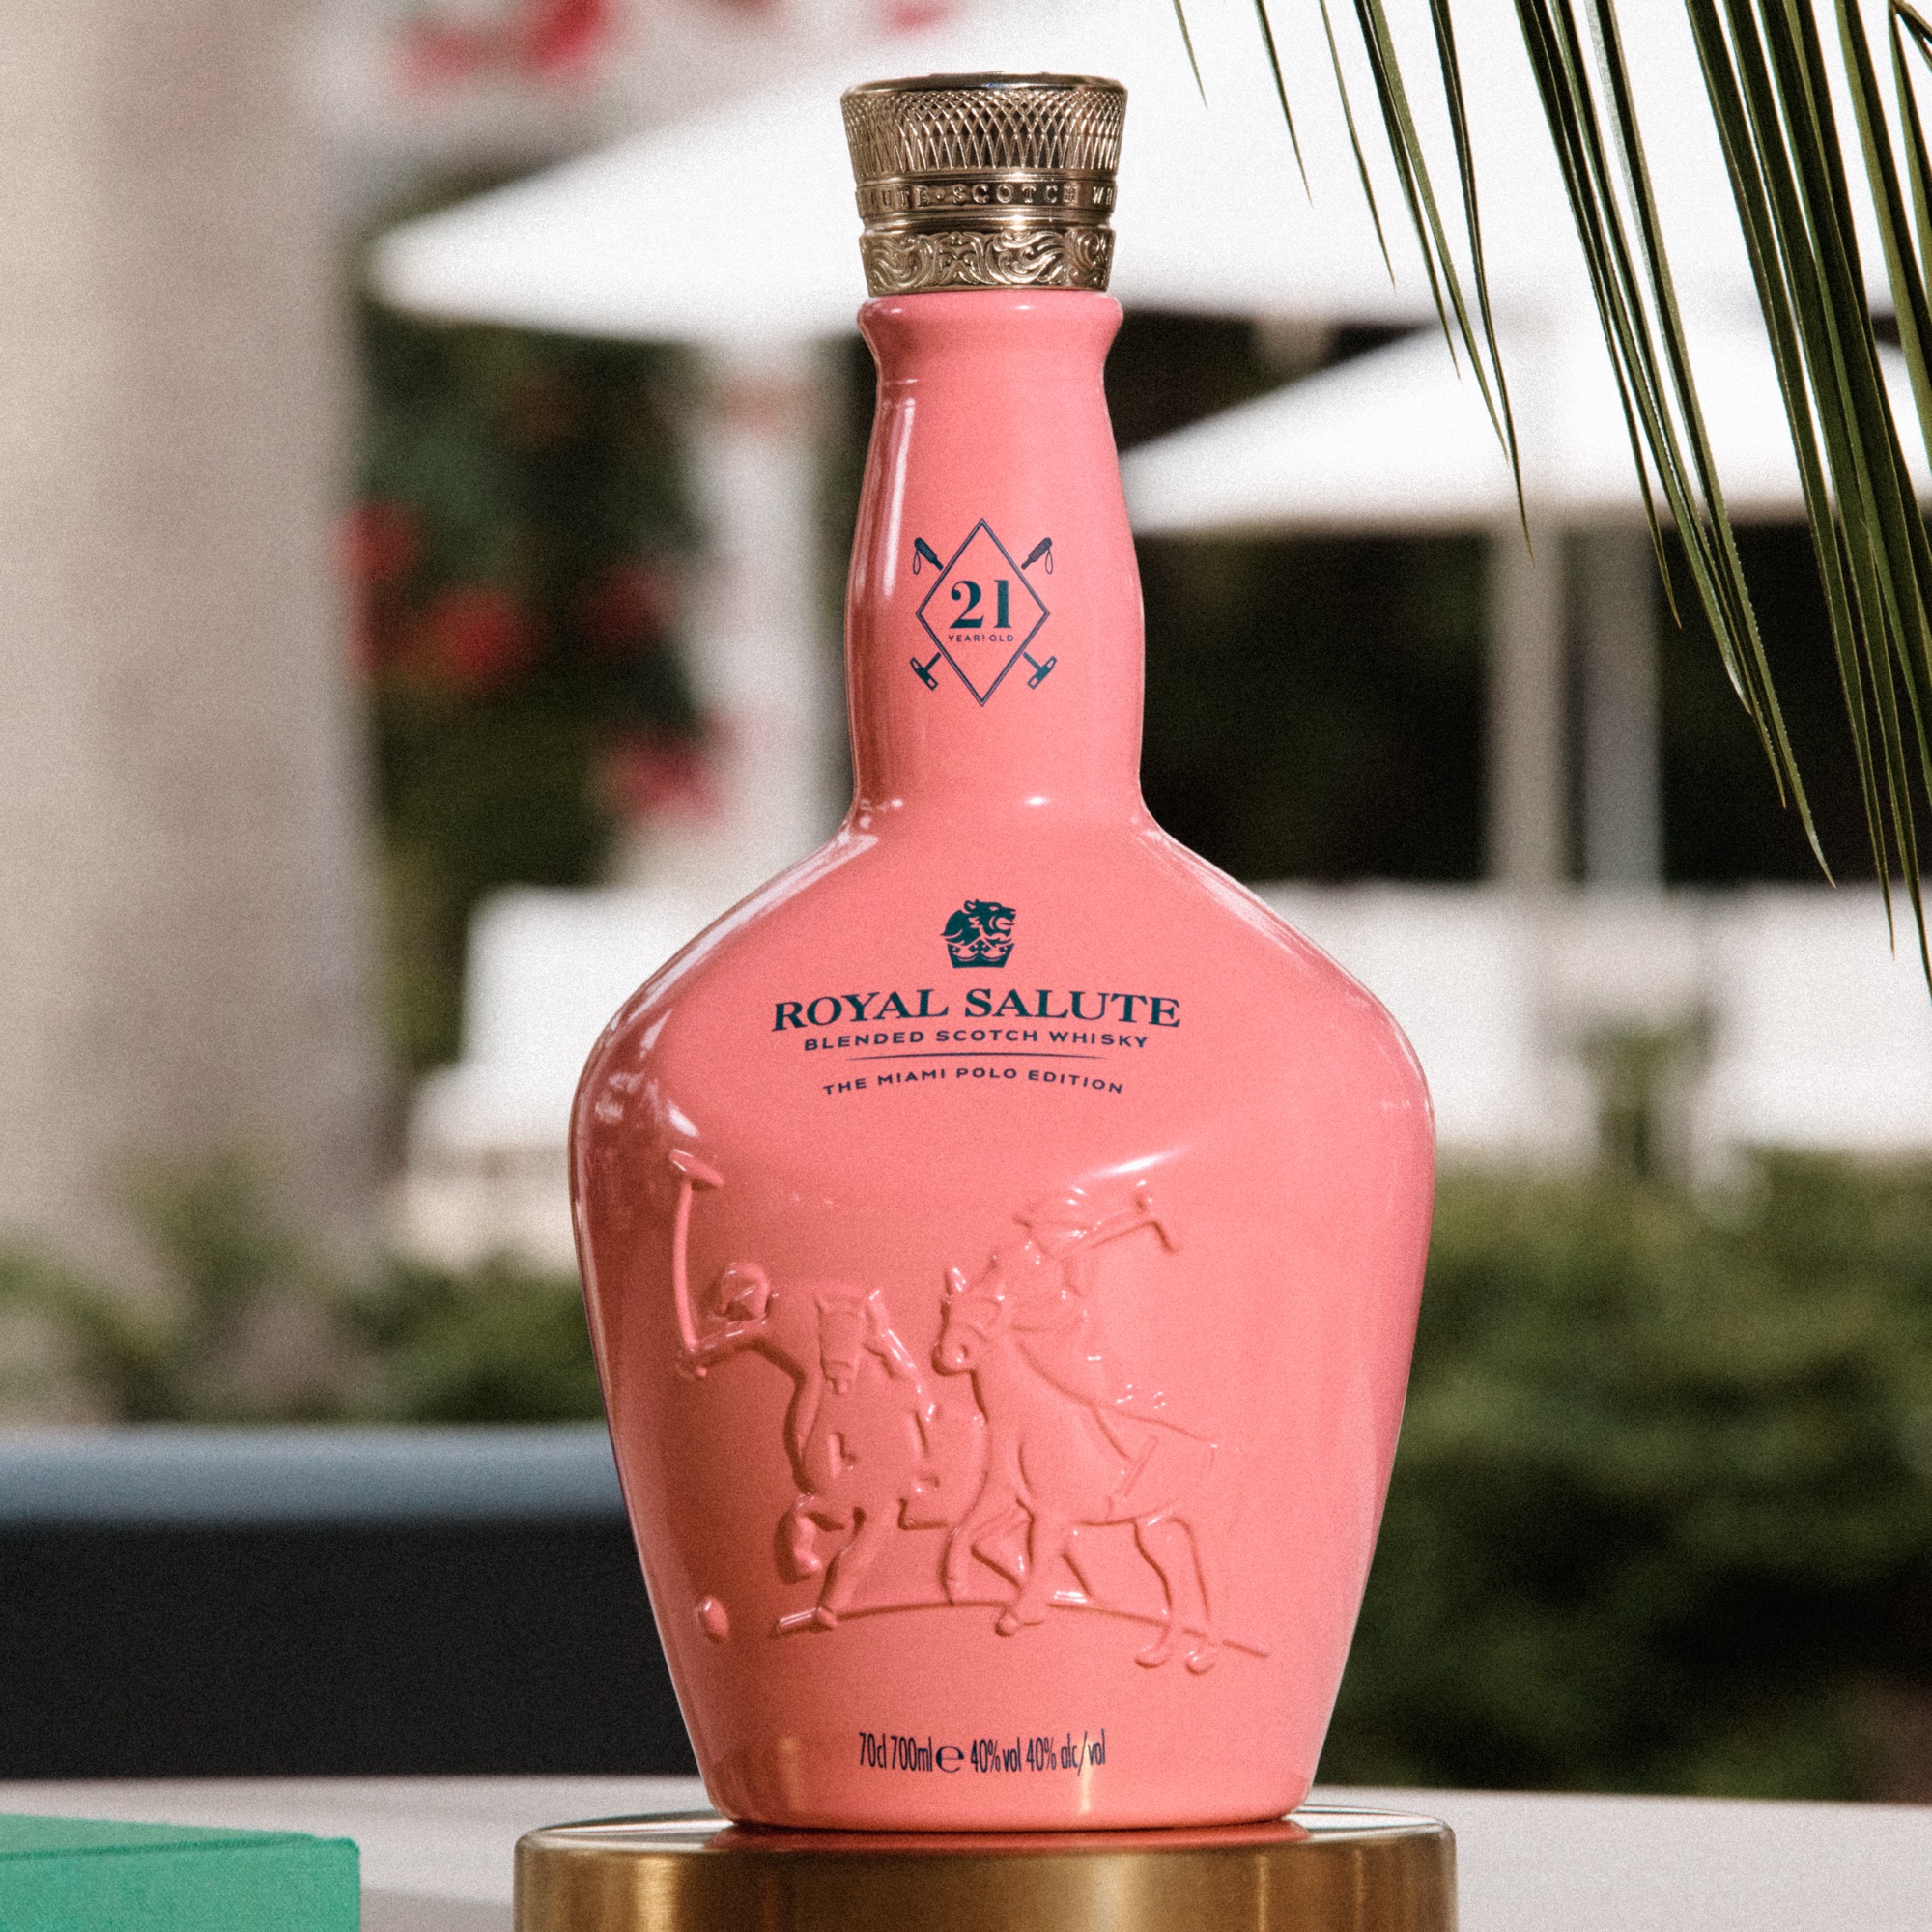 Royal Salute’s New Miami Polo Edition Is Bold & Vibrant